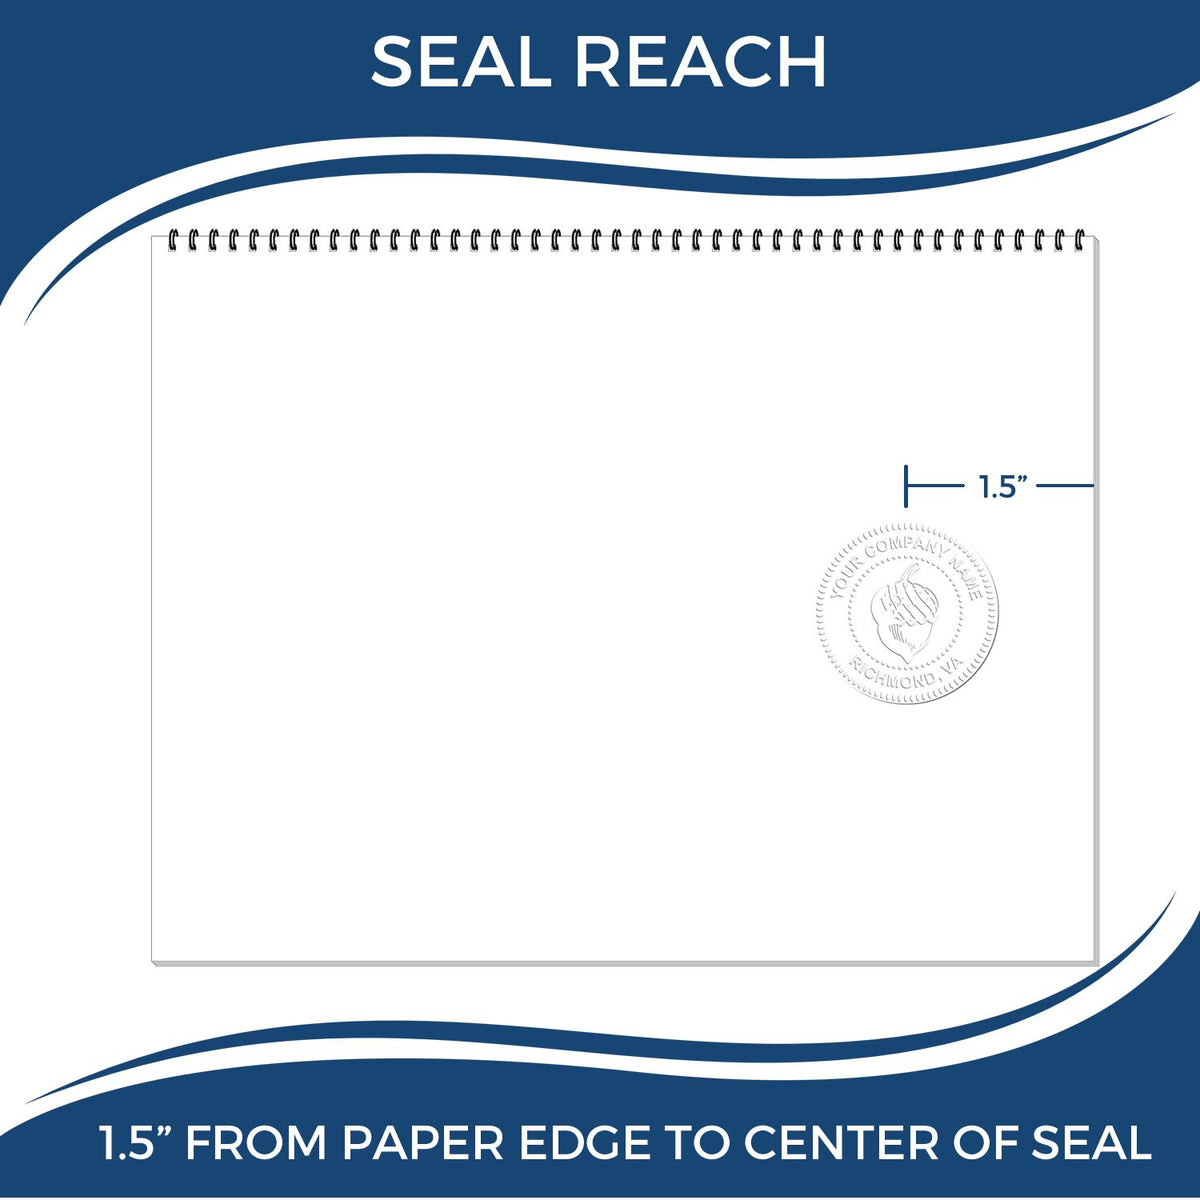 An infographic showing the seal reach which is represented by a ruler and a miniature seal image of the Georgia Desk Surveyor Seal Embosser